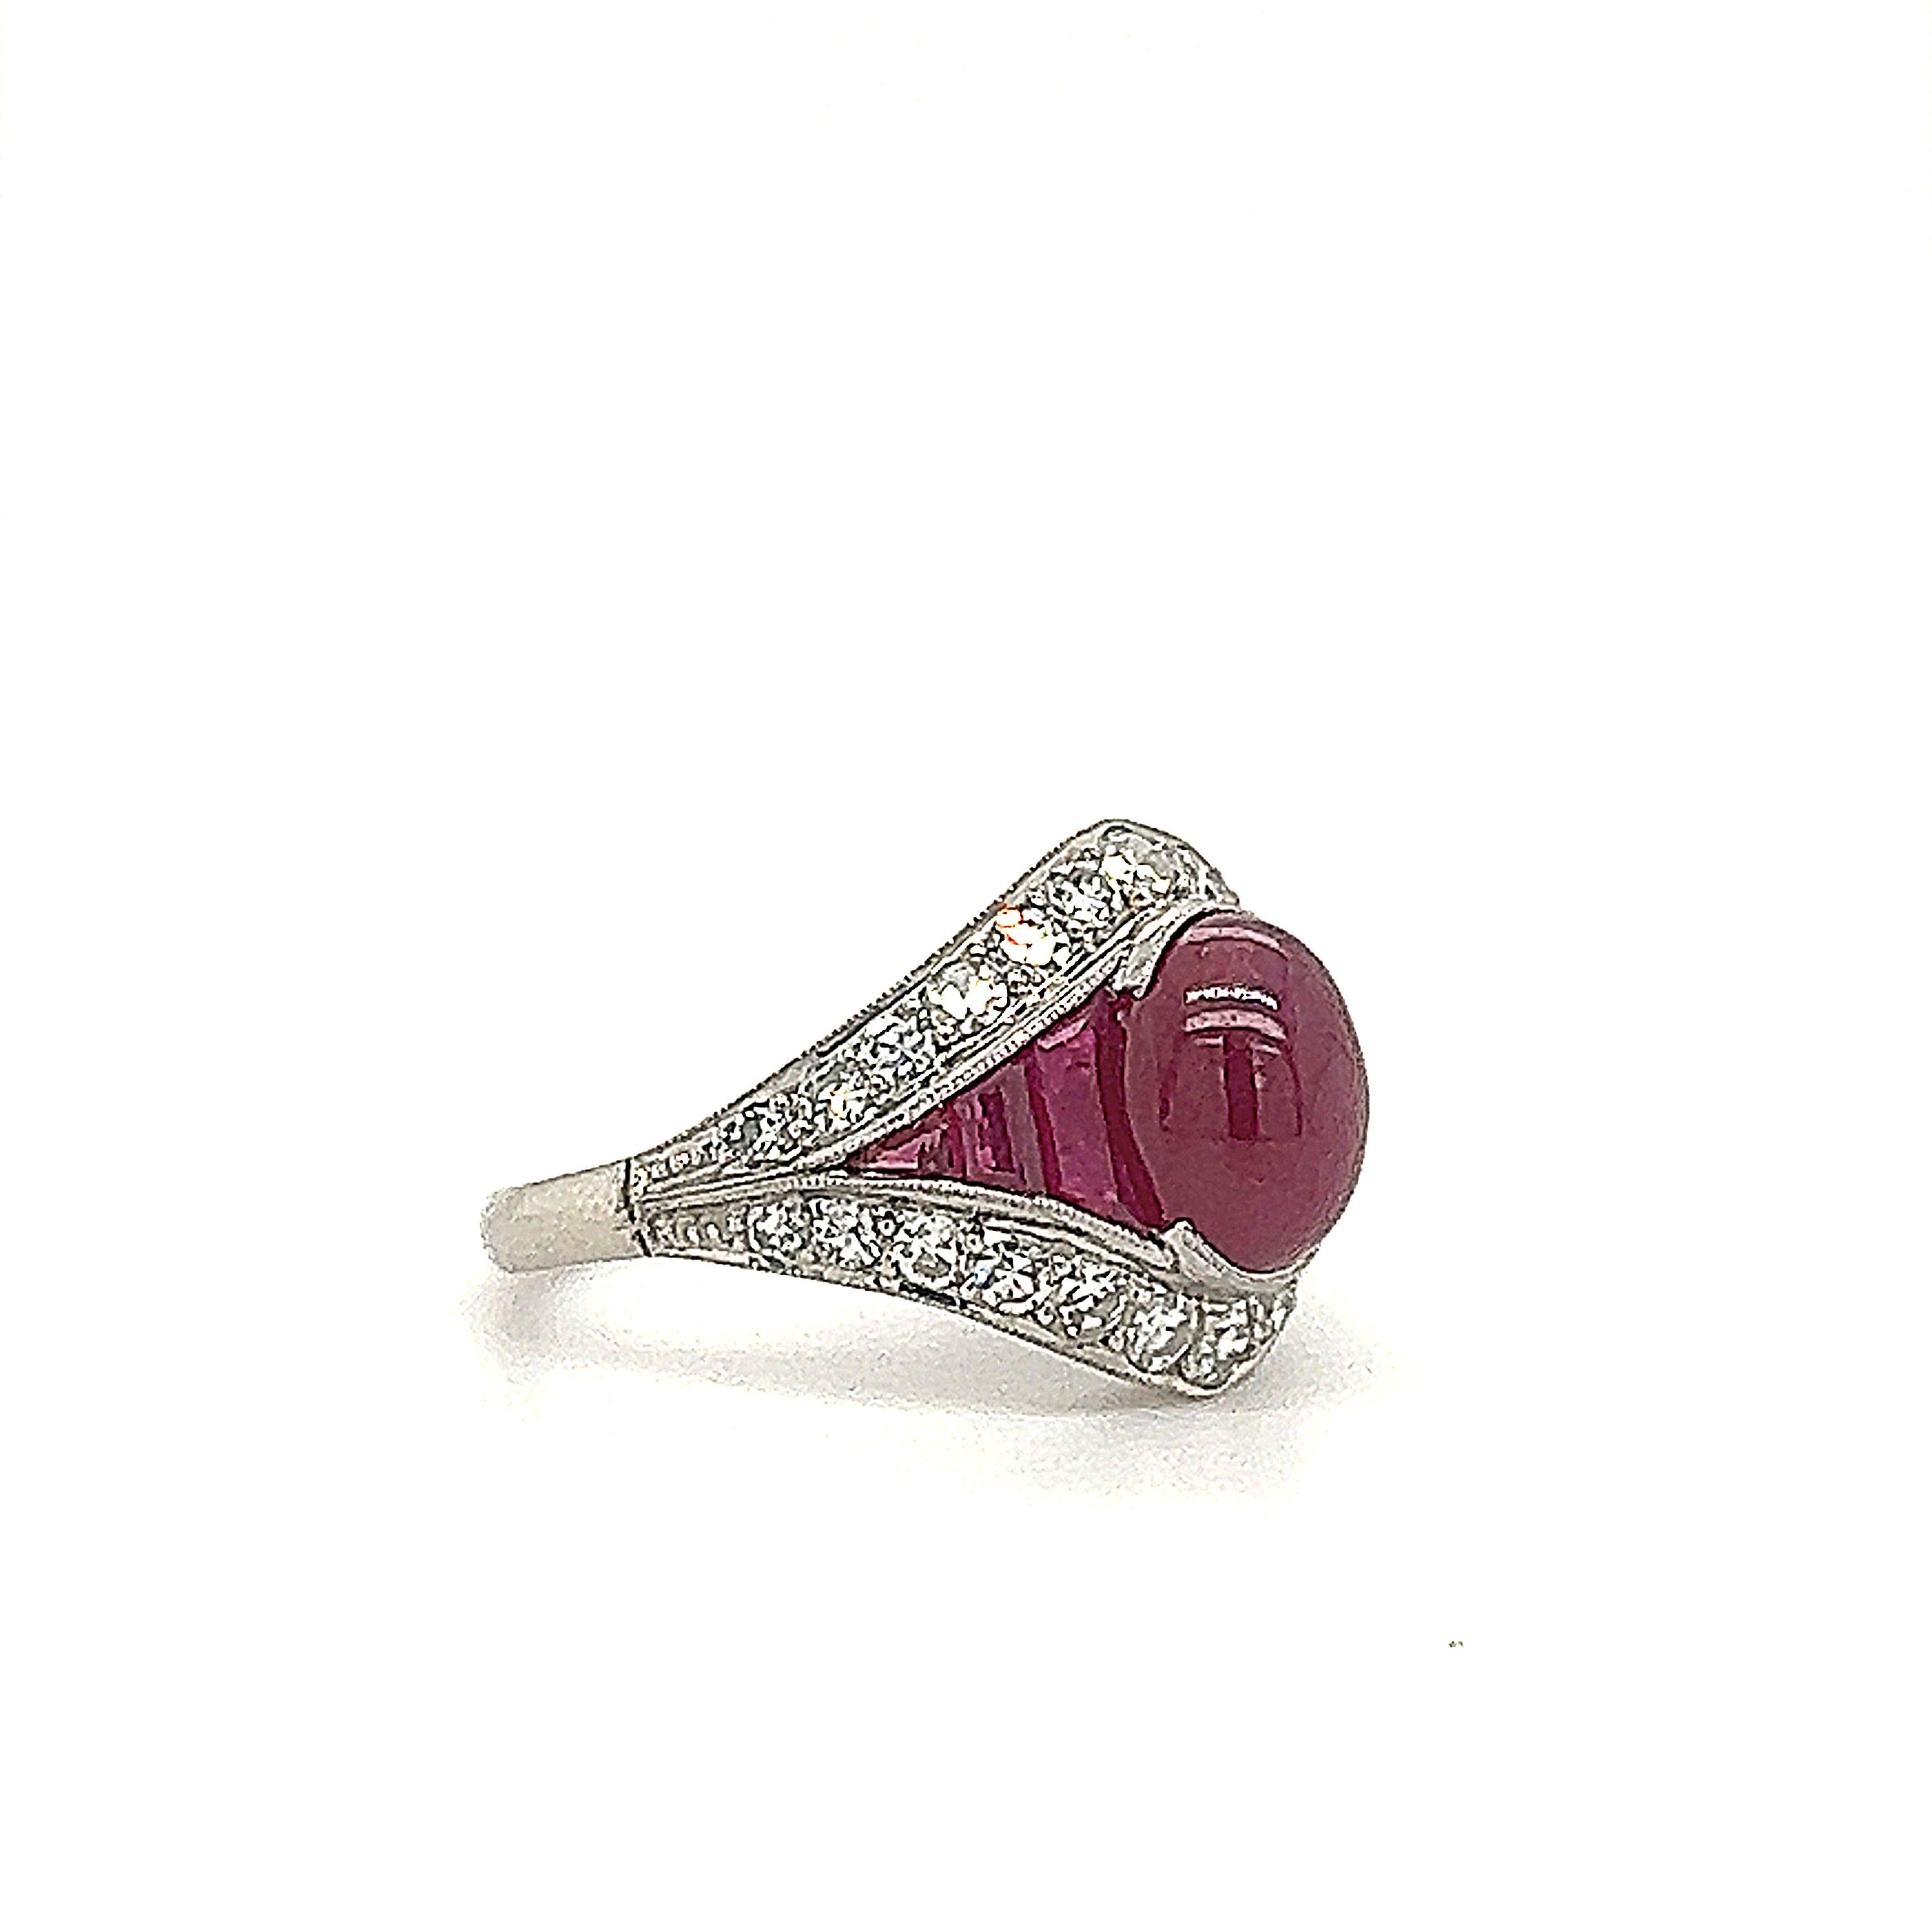 Wonderful creation crafted in 18k white gold. Styled after the art deco time period this ring is truly breathtaking and a real show stopper. The ring shows a unique design as diamond and ruby gemstones are set perfectly making this ring a true work